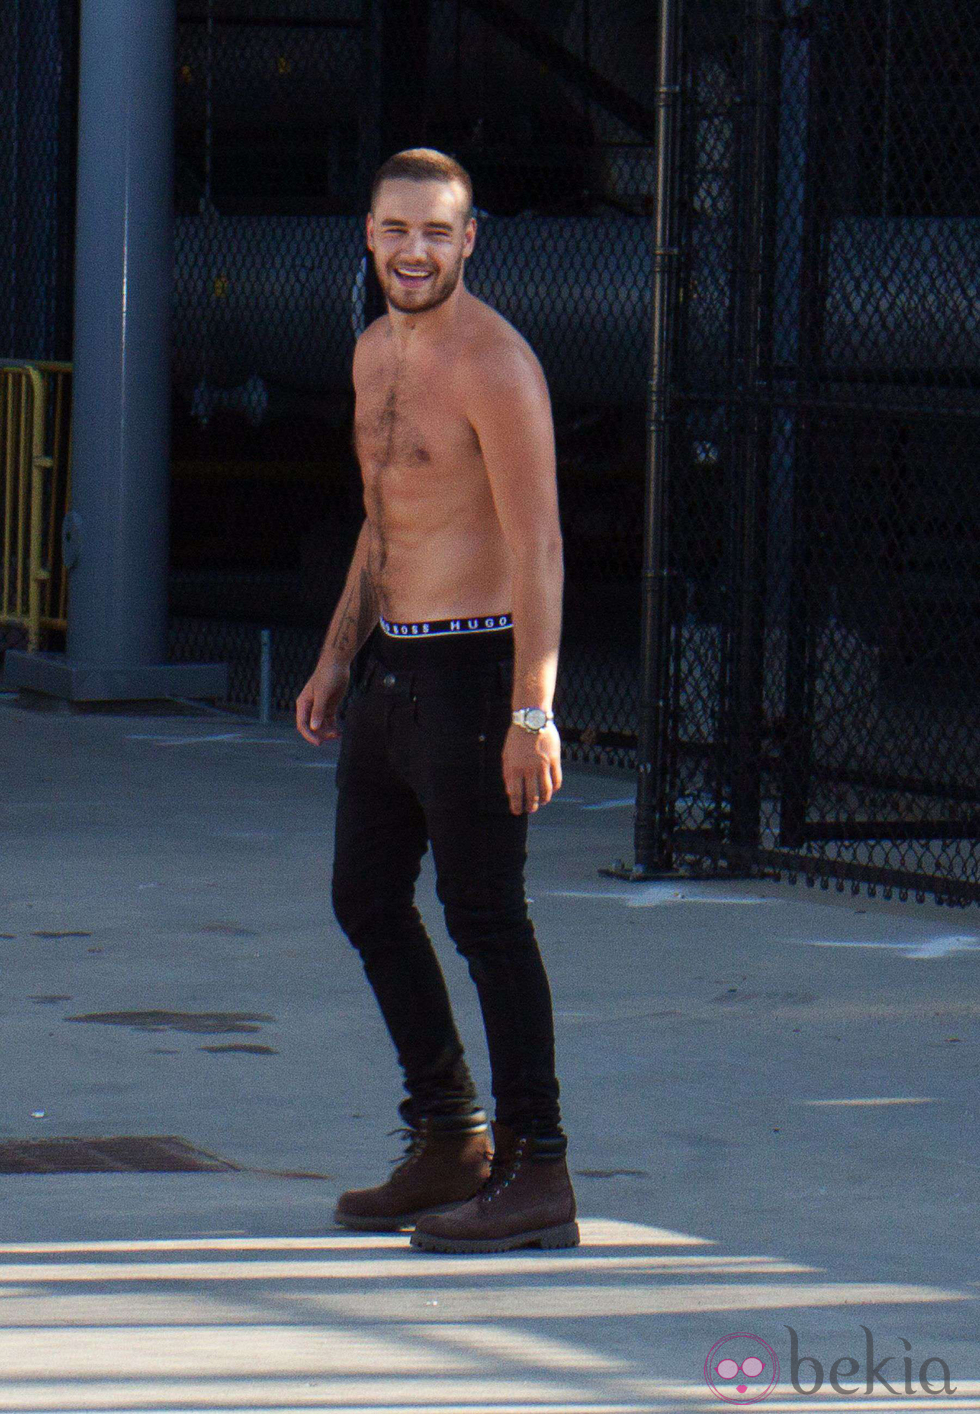 EAST RUTHERFORD, NJ - AUGUST 04: Liam Payne from the band One Direction shoots hoops prior to a concert appearance with the band August 4, 2014 at MetLife Stadium in East Rutherford, New Jersey.  (Photo by Paula Barbagallo/North Jersey Media Group/Getty Images)